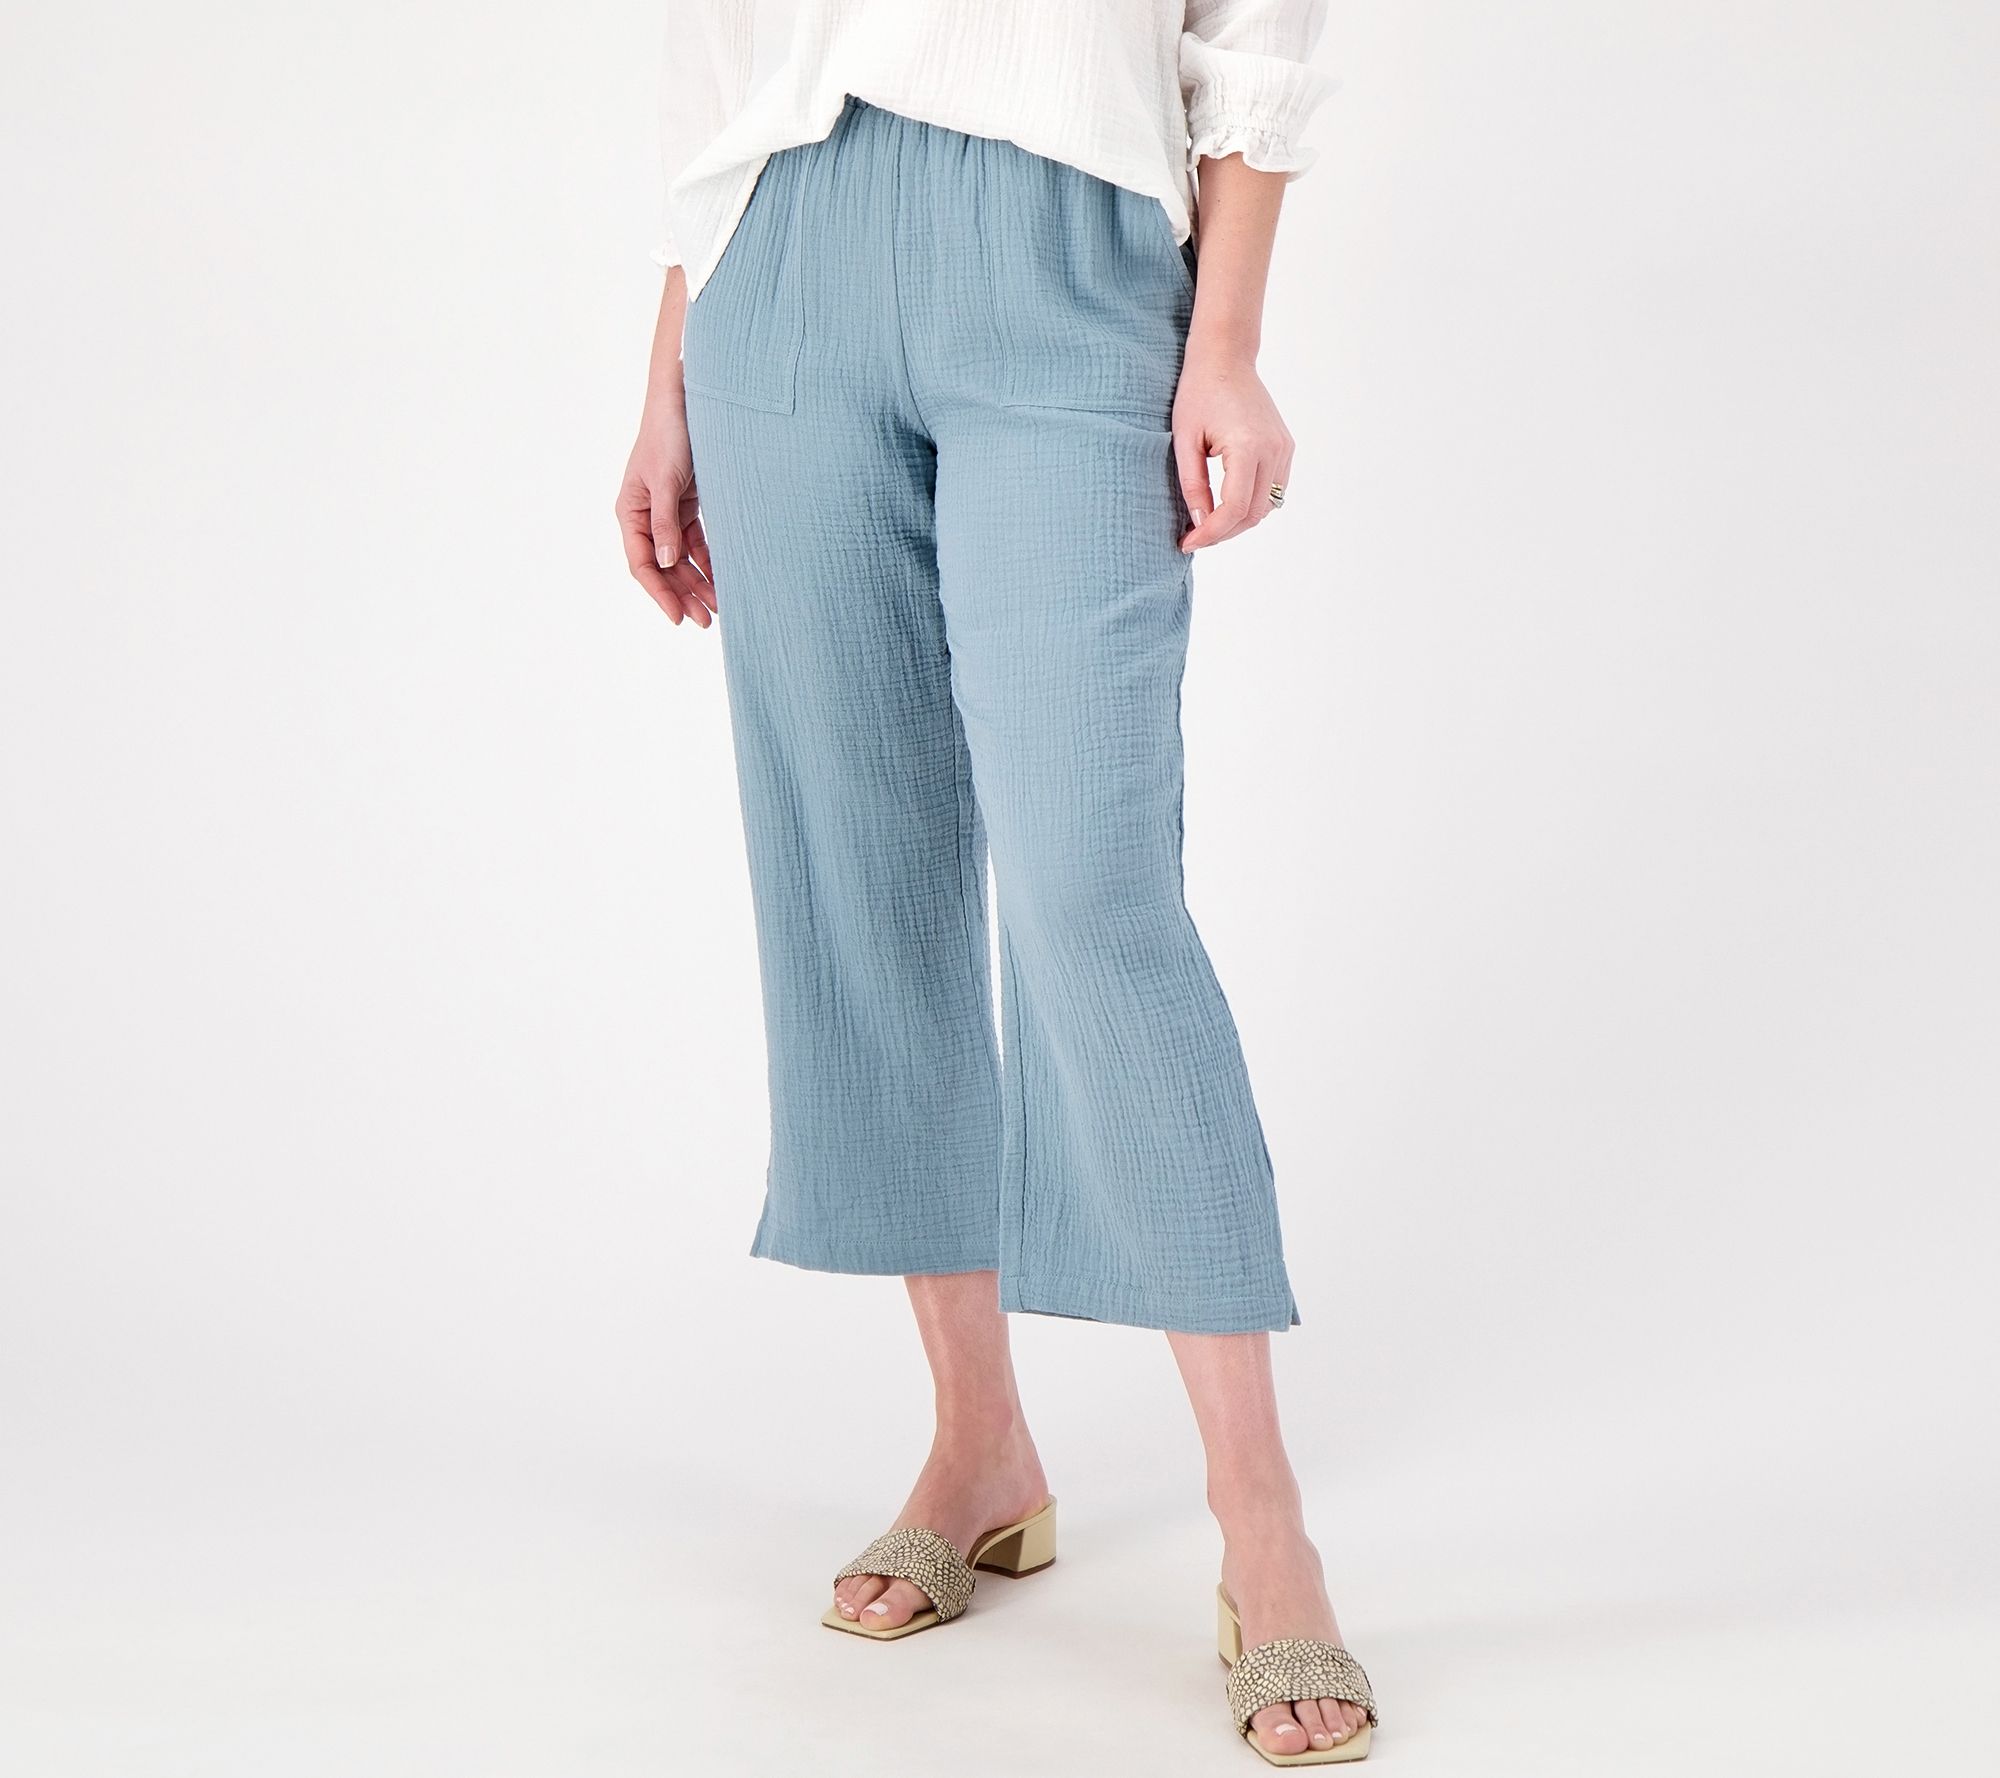 QVC) Denim & Co. Comfy Knit Air RegularStraight Crop Pant with Side Slits –  TVShoppingQueens